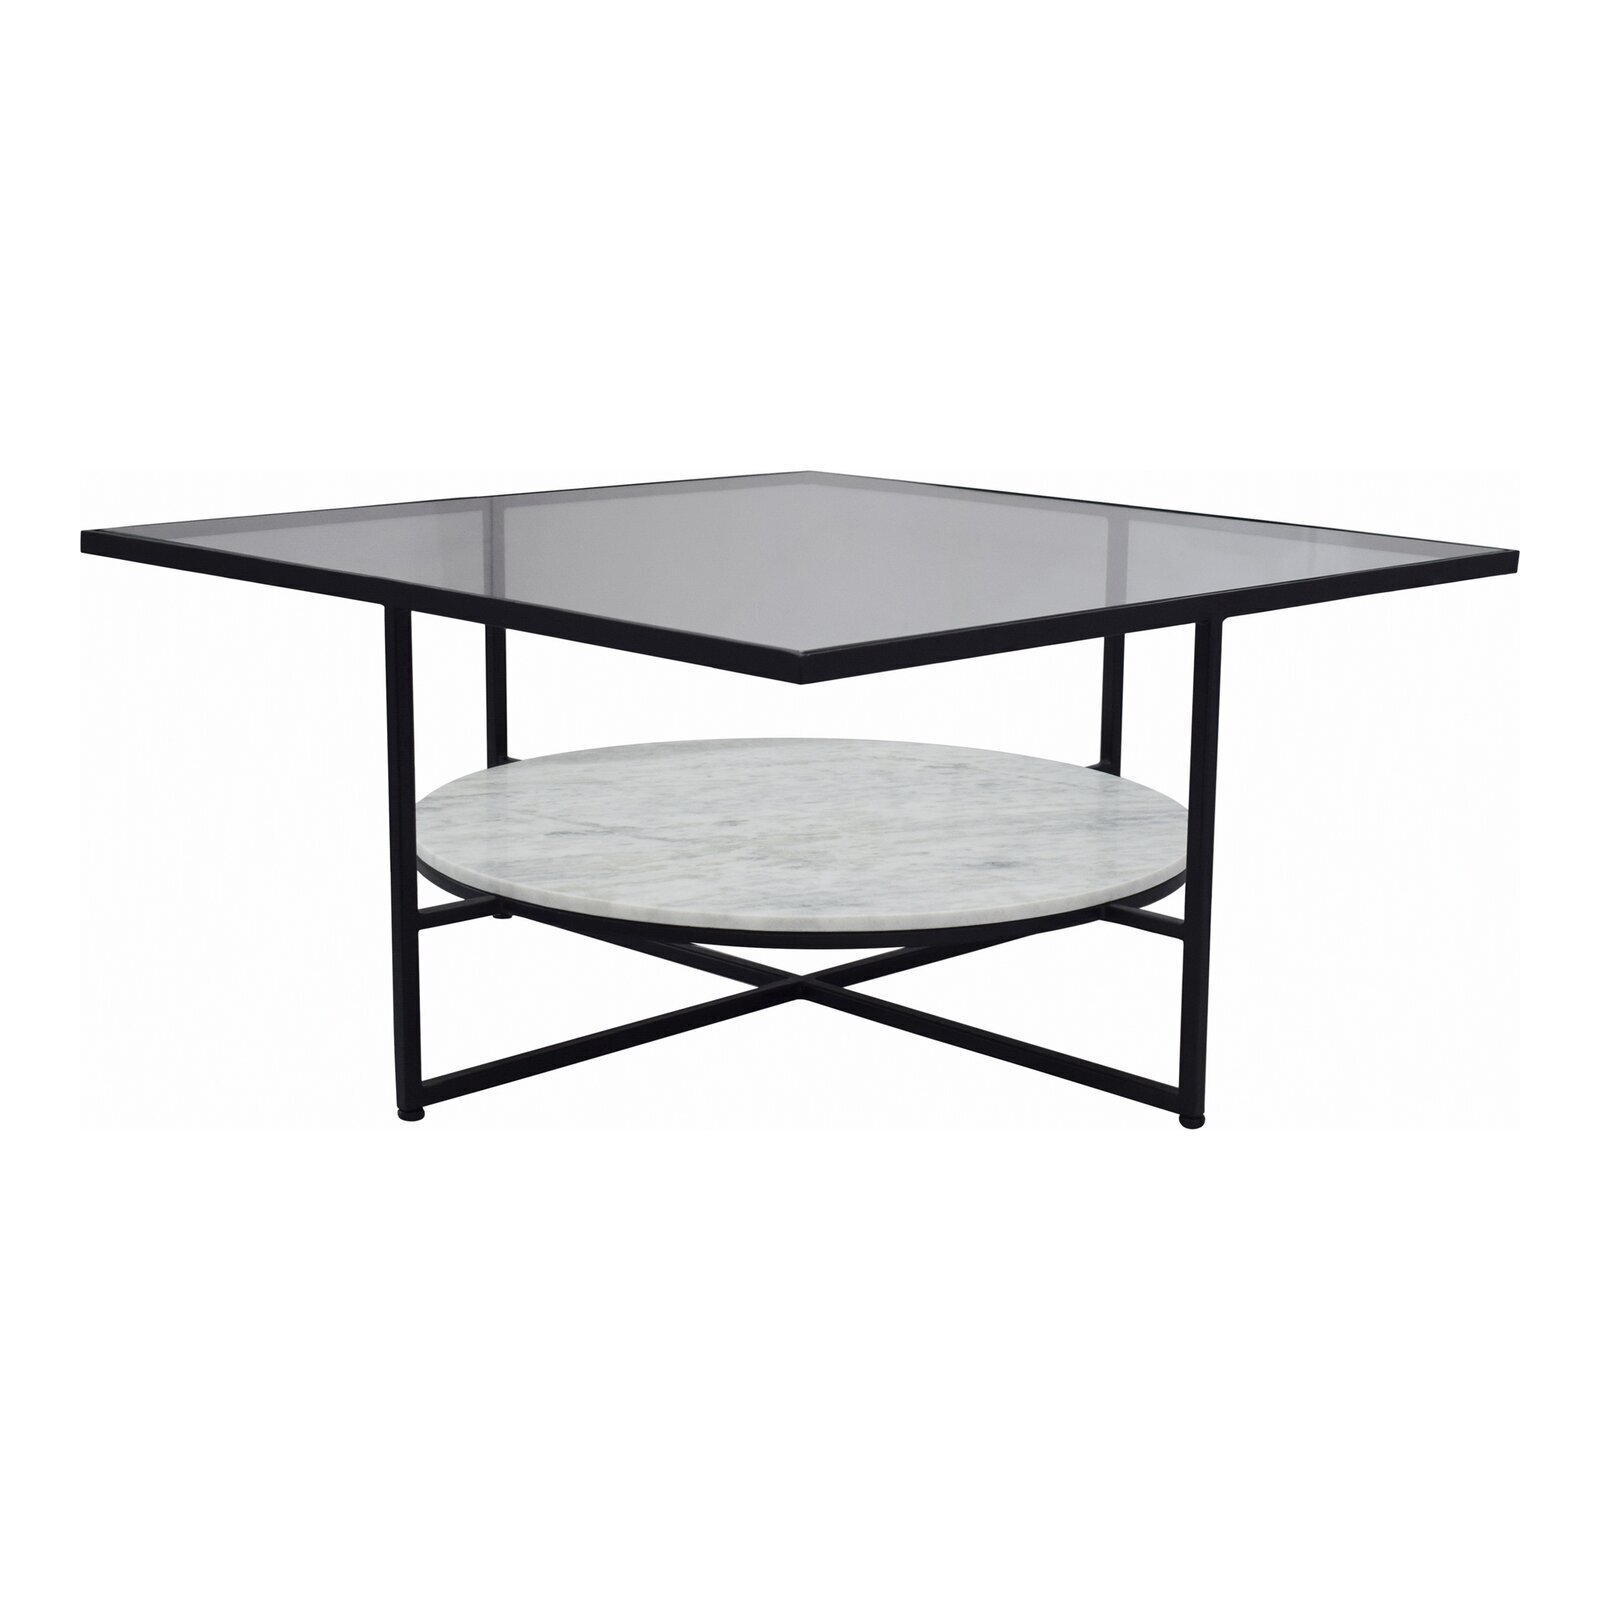 Stylish black wrought iron coffee table with glass